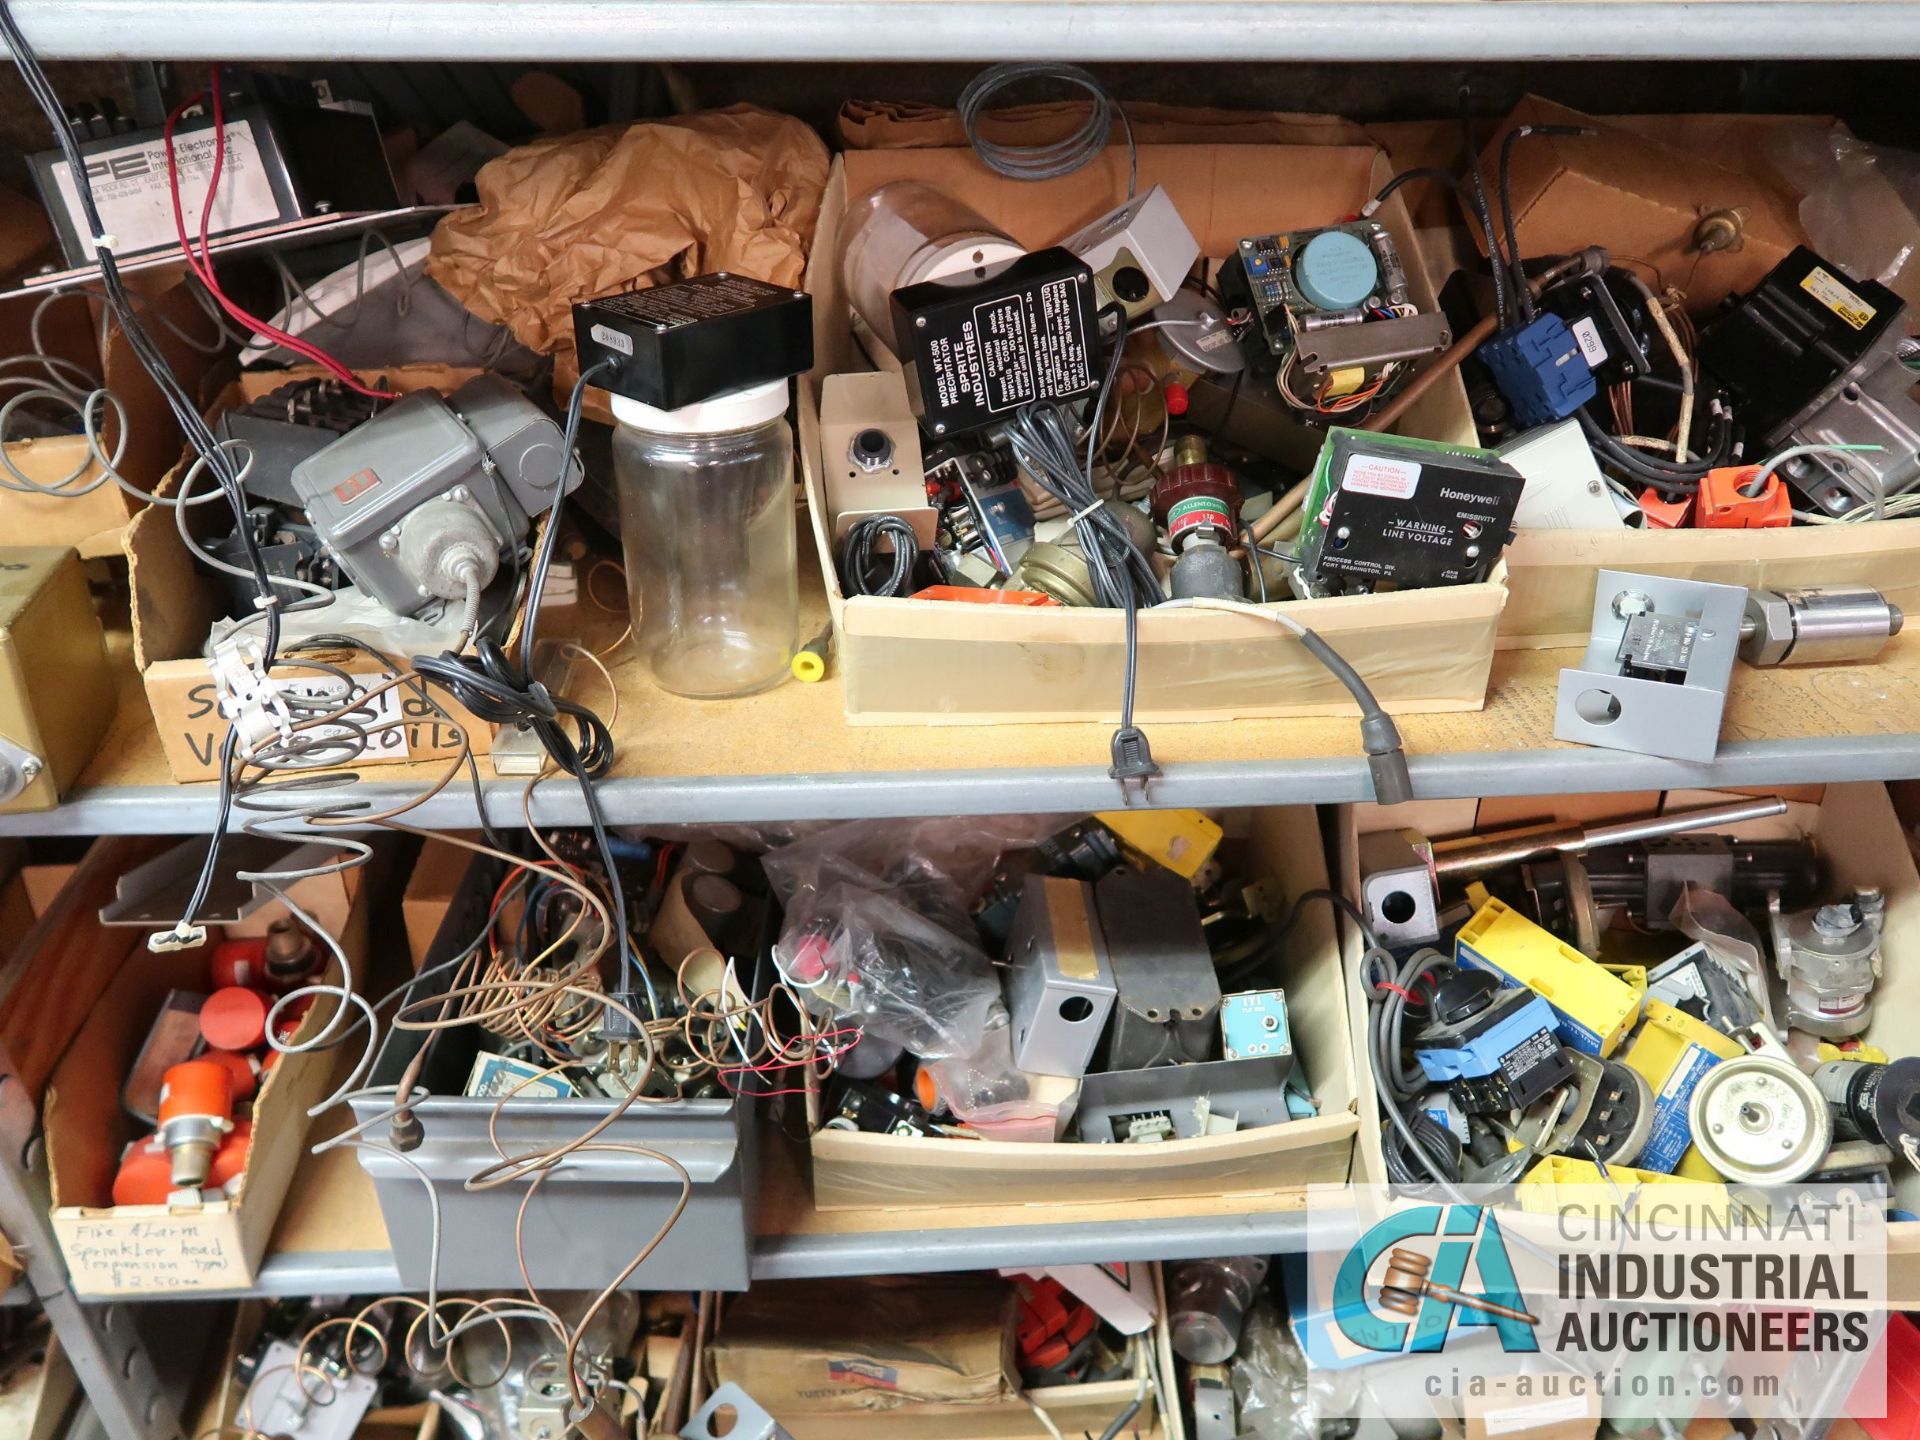 CONTENTS OF (16) SHELVES INCLUDING MISCELLANEOUS VALVES, THERMOSTATS, ANALYZERS, ELECTRICAL, CONTROL - Image 19 of 47